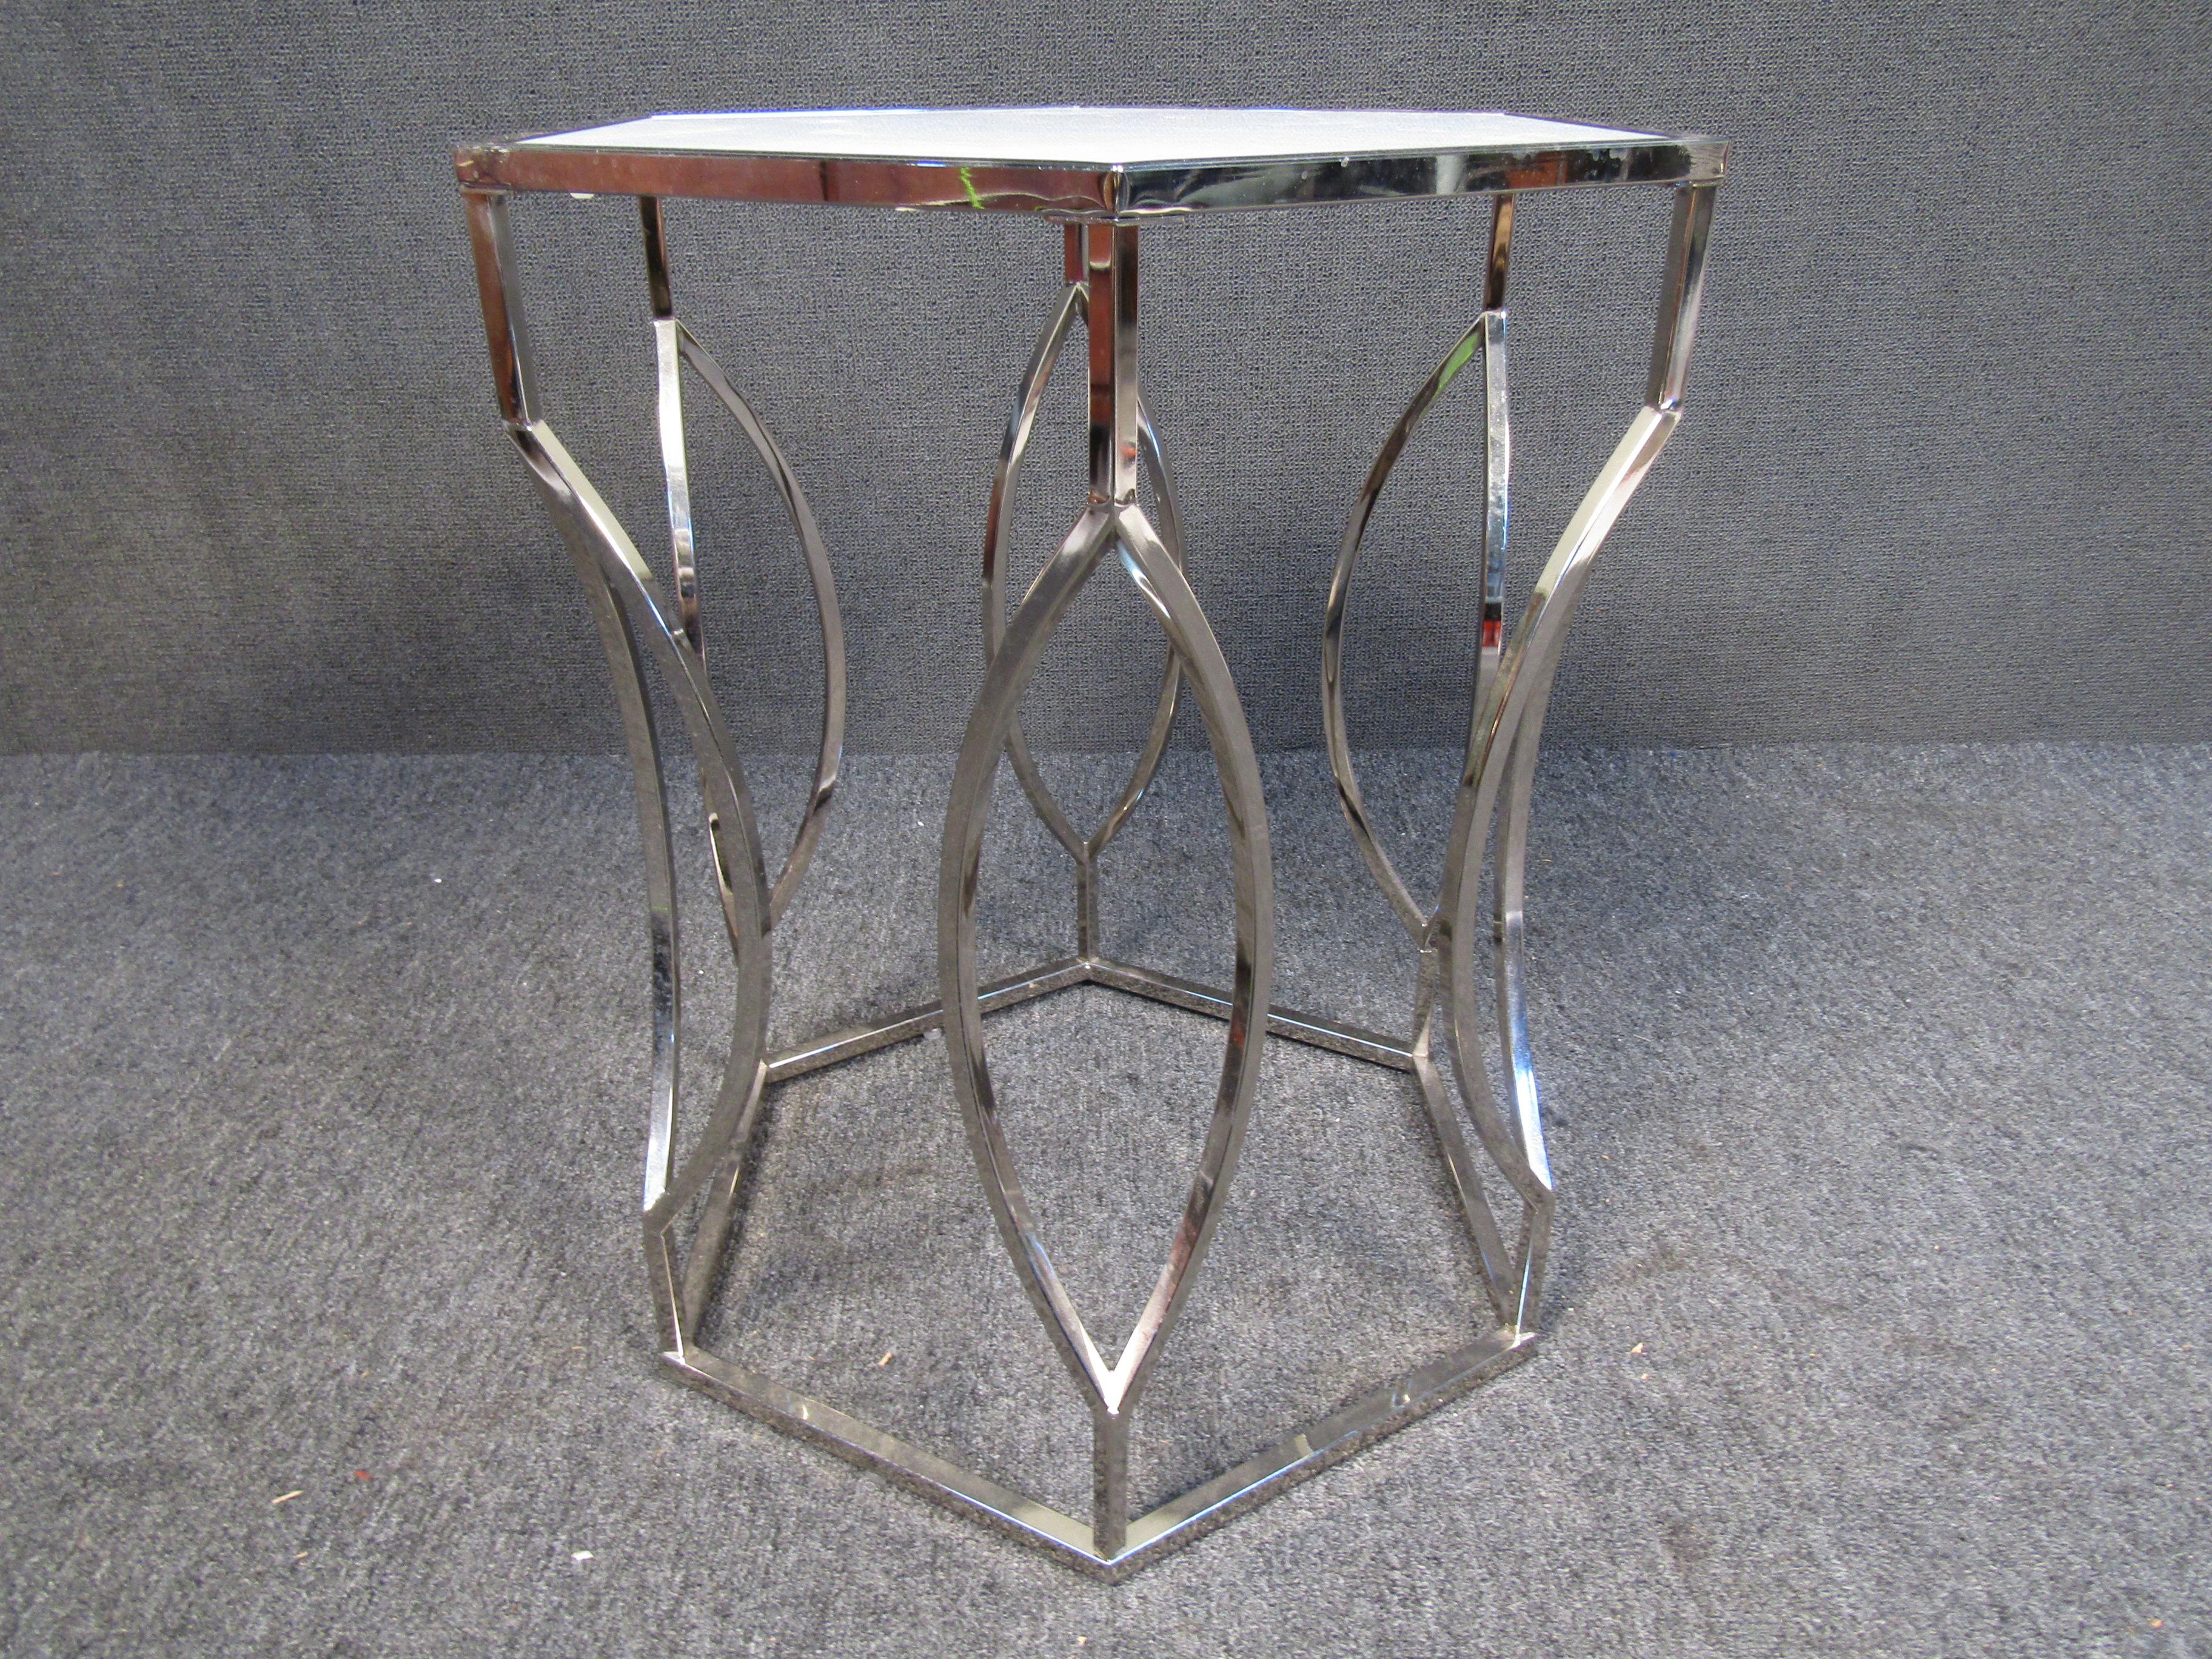 This Mid-Century Modern side table features a unique metal base forming a twisted design. The tables top is a detachable octagonal piece of milk glass. This table is sure to compliment any modern living space. Please confirm item location (NJ or NY).